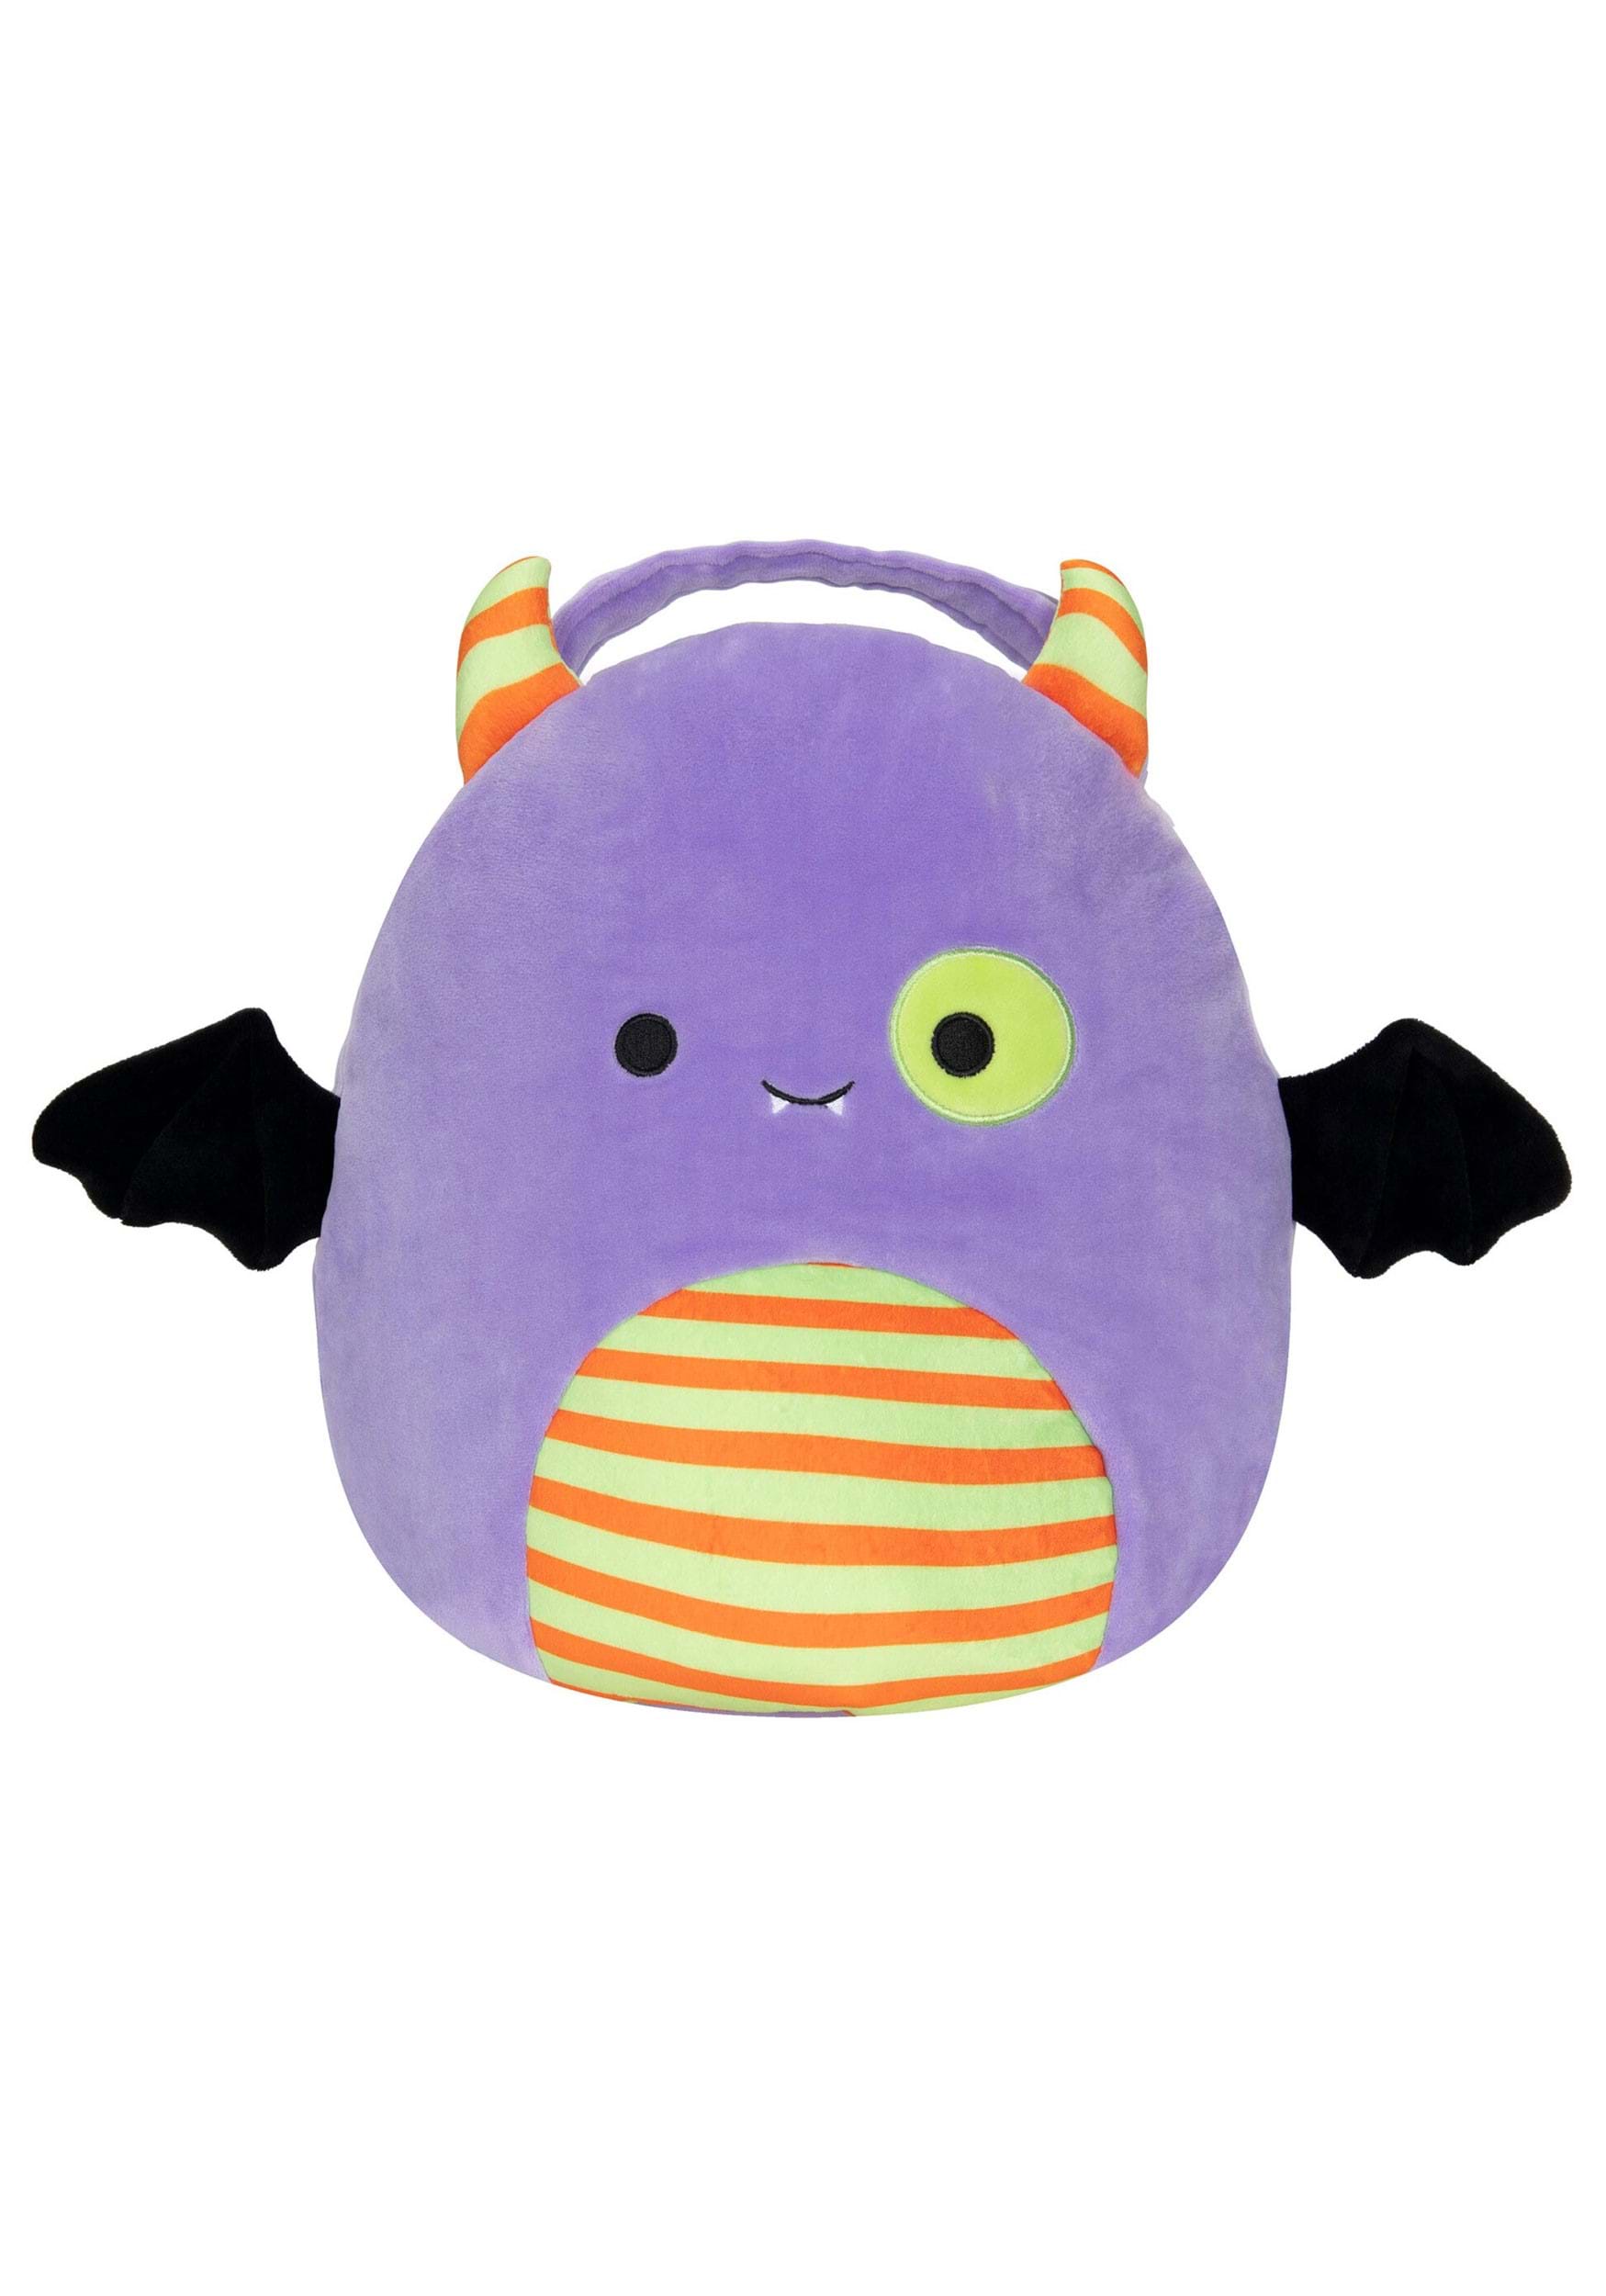 https://images.halloweencostumes.com/products/86914/1-1/squishmallow-marvin-the-monster-treat-pail.jpg